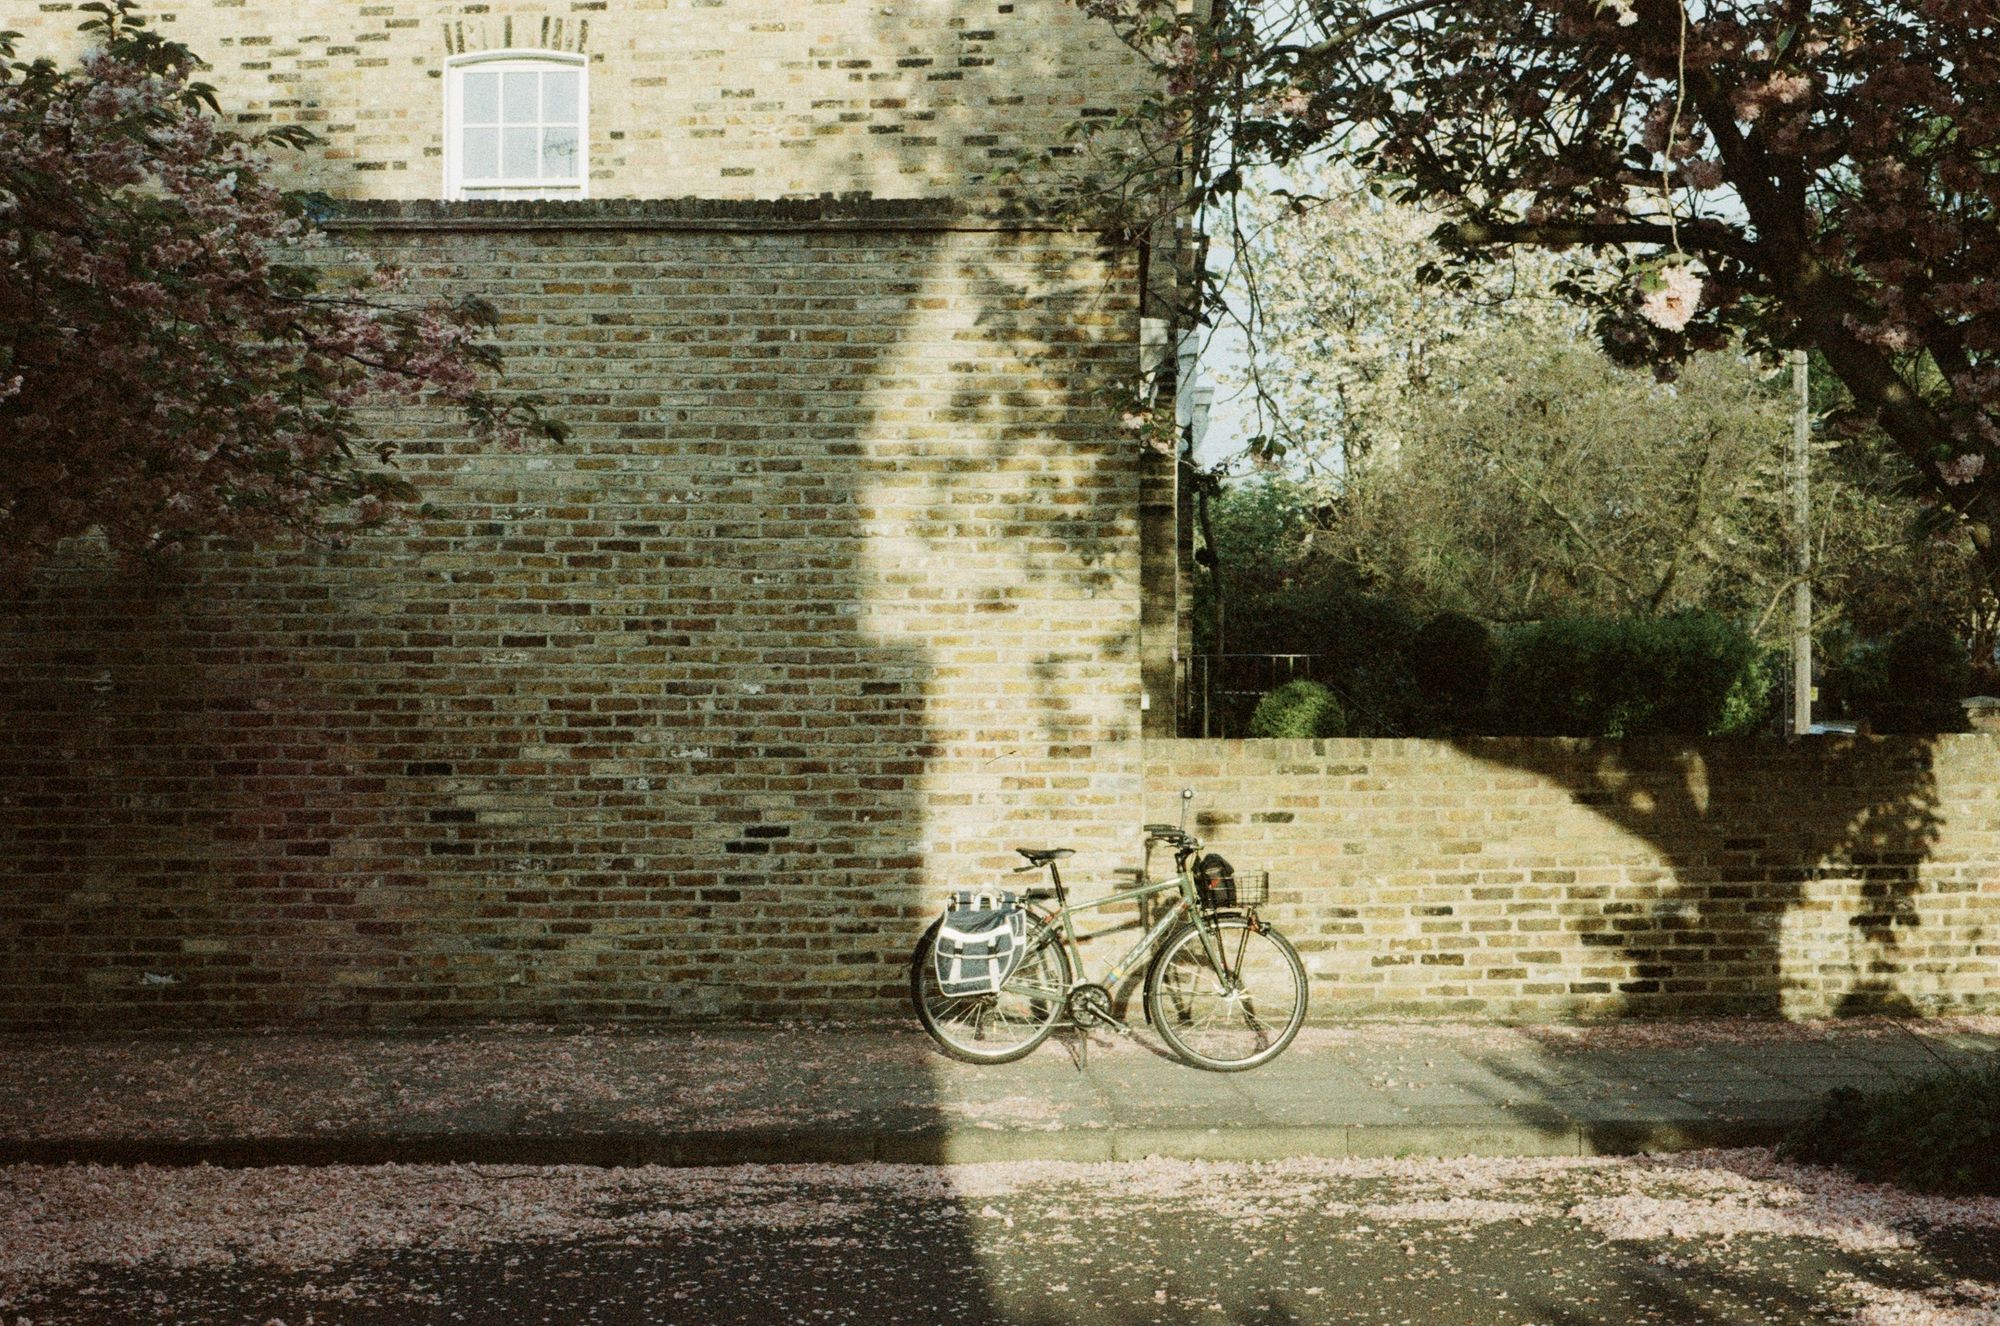 A brick wall at the side of a house and garden with the golden hour sun's shadow cast sharply across it. A green bicycle with blue panniers stands on its kickstand on the pavement. There are pink petals everywhere—on the carriageway, on the pavement, and it's glorious but feels a little sad and deflated.